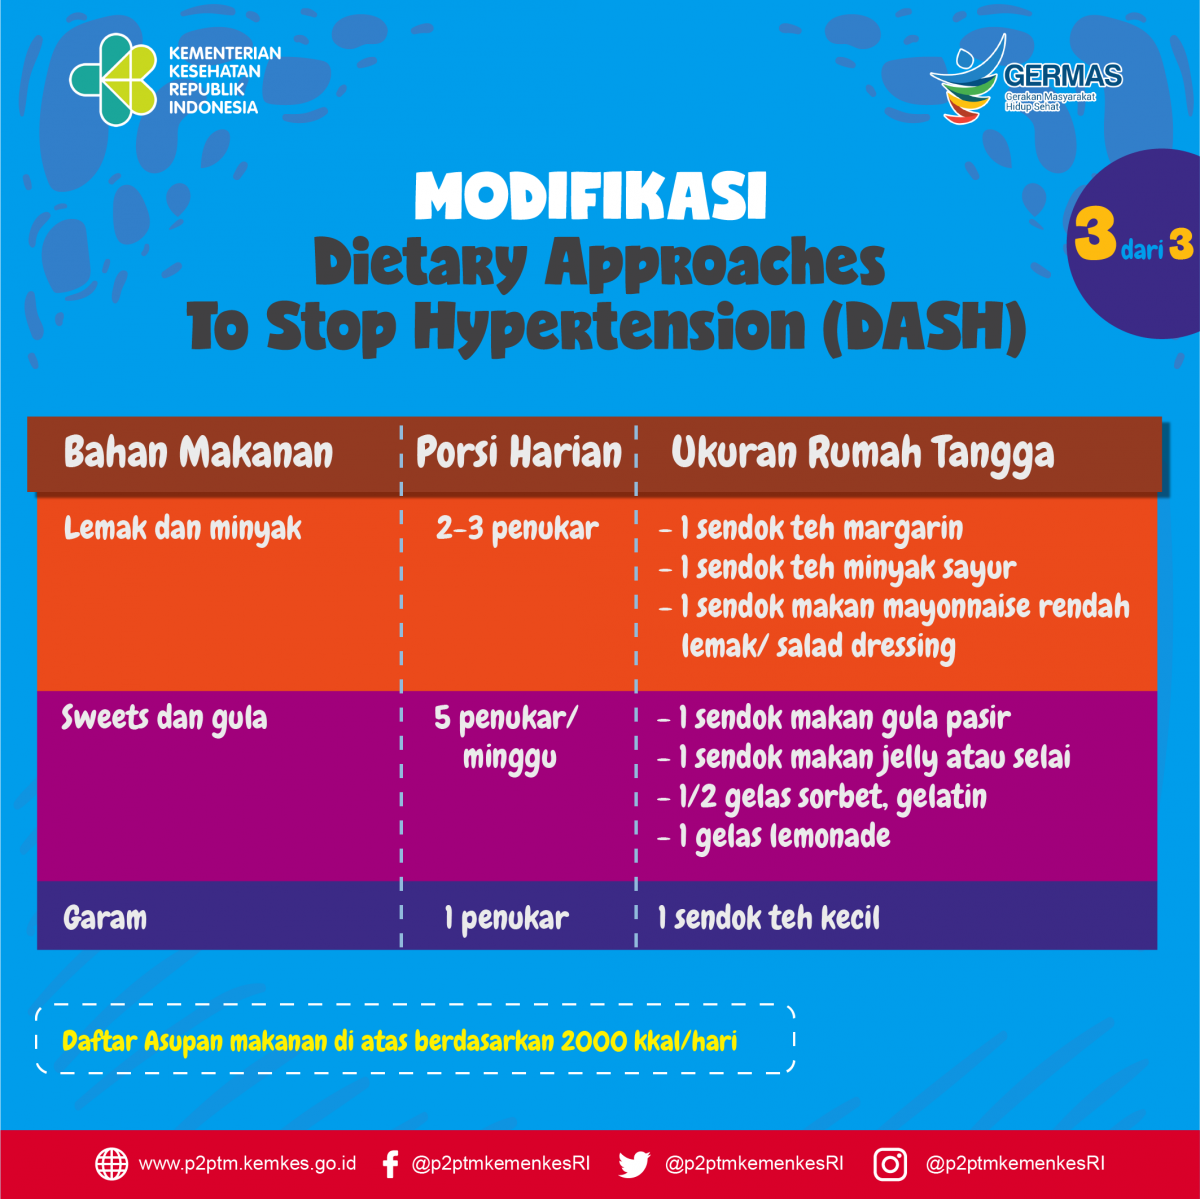 Tabel Modifikasi Dietary Approaches To Stop Hypertension (DASH) - bagian 3